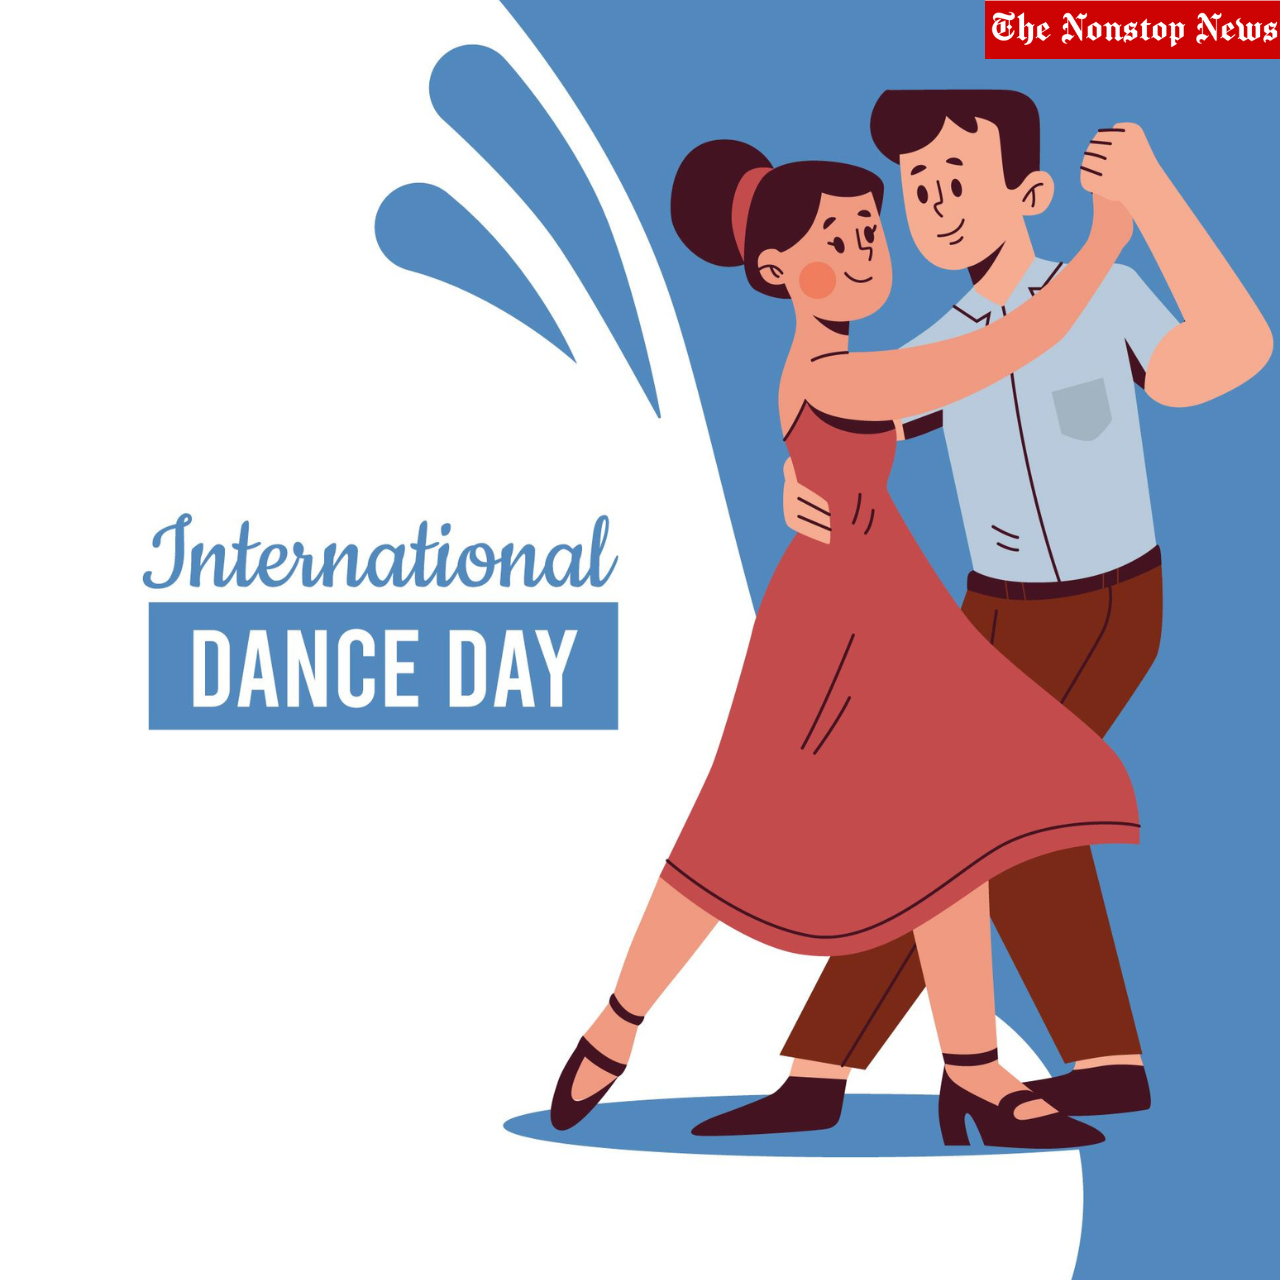 Happy International Dance Day 2023 Instagram Captions, Facebook Status, Twitter Greetings, Pinterest Images, Banners, Posters, and Captions